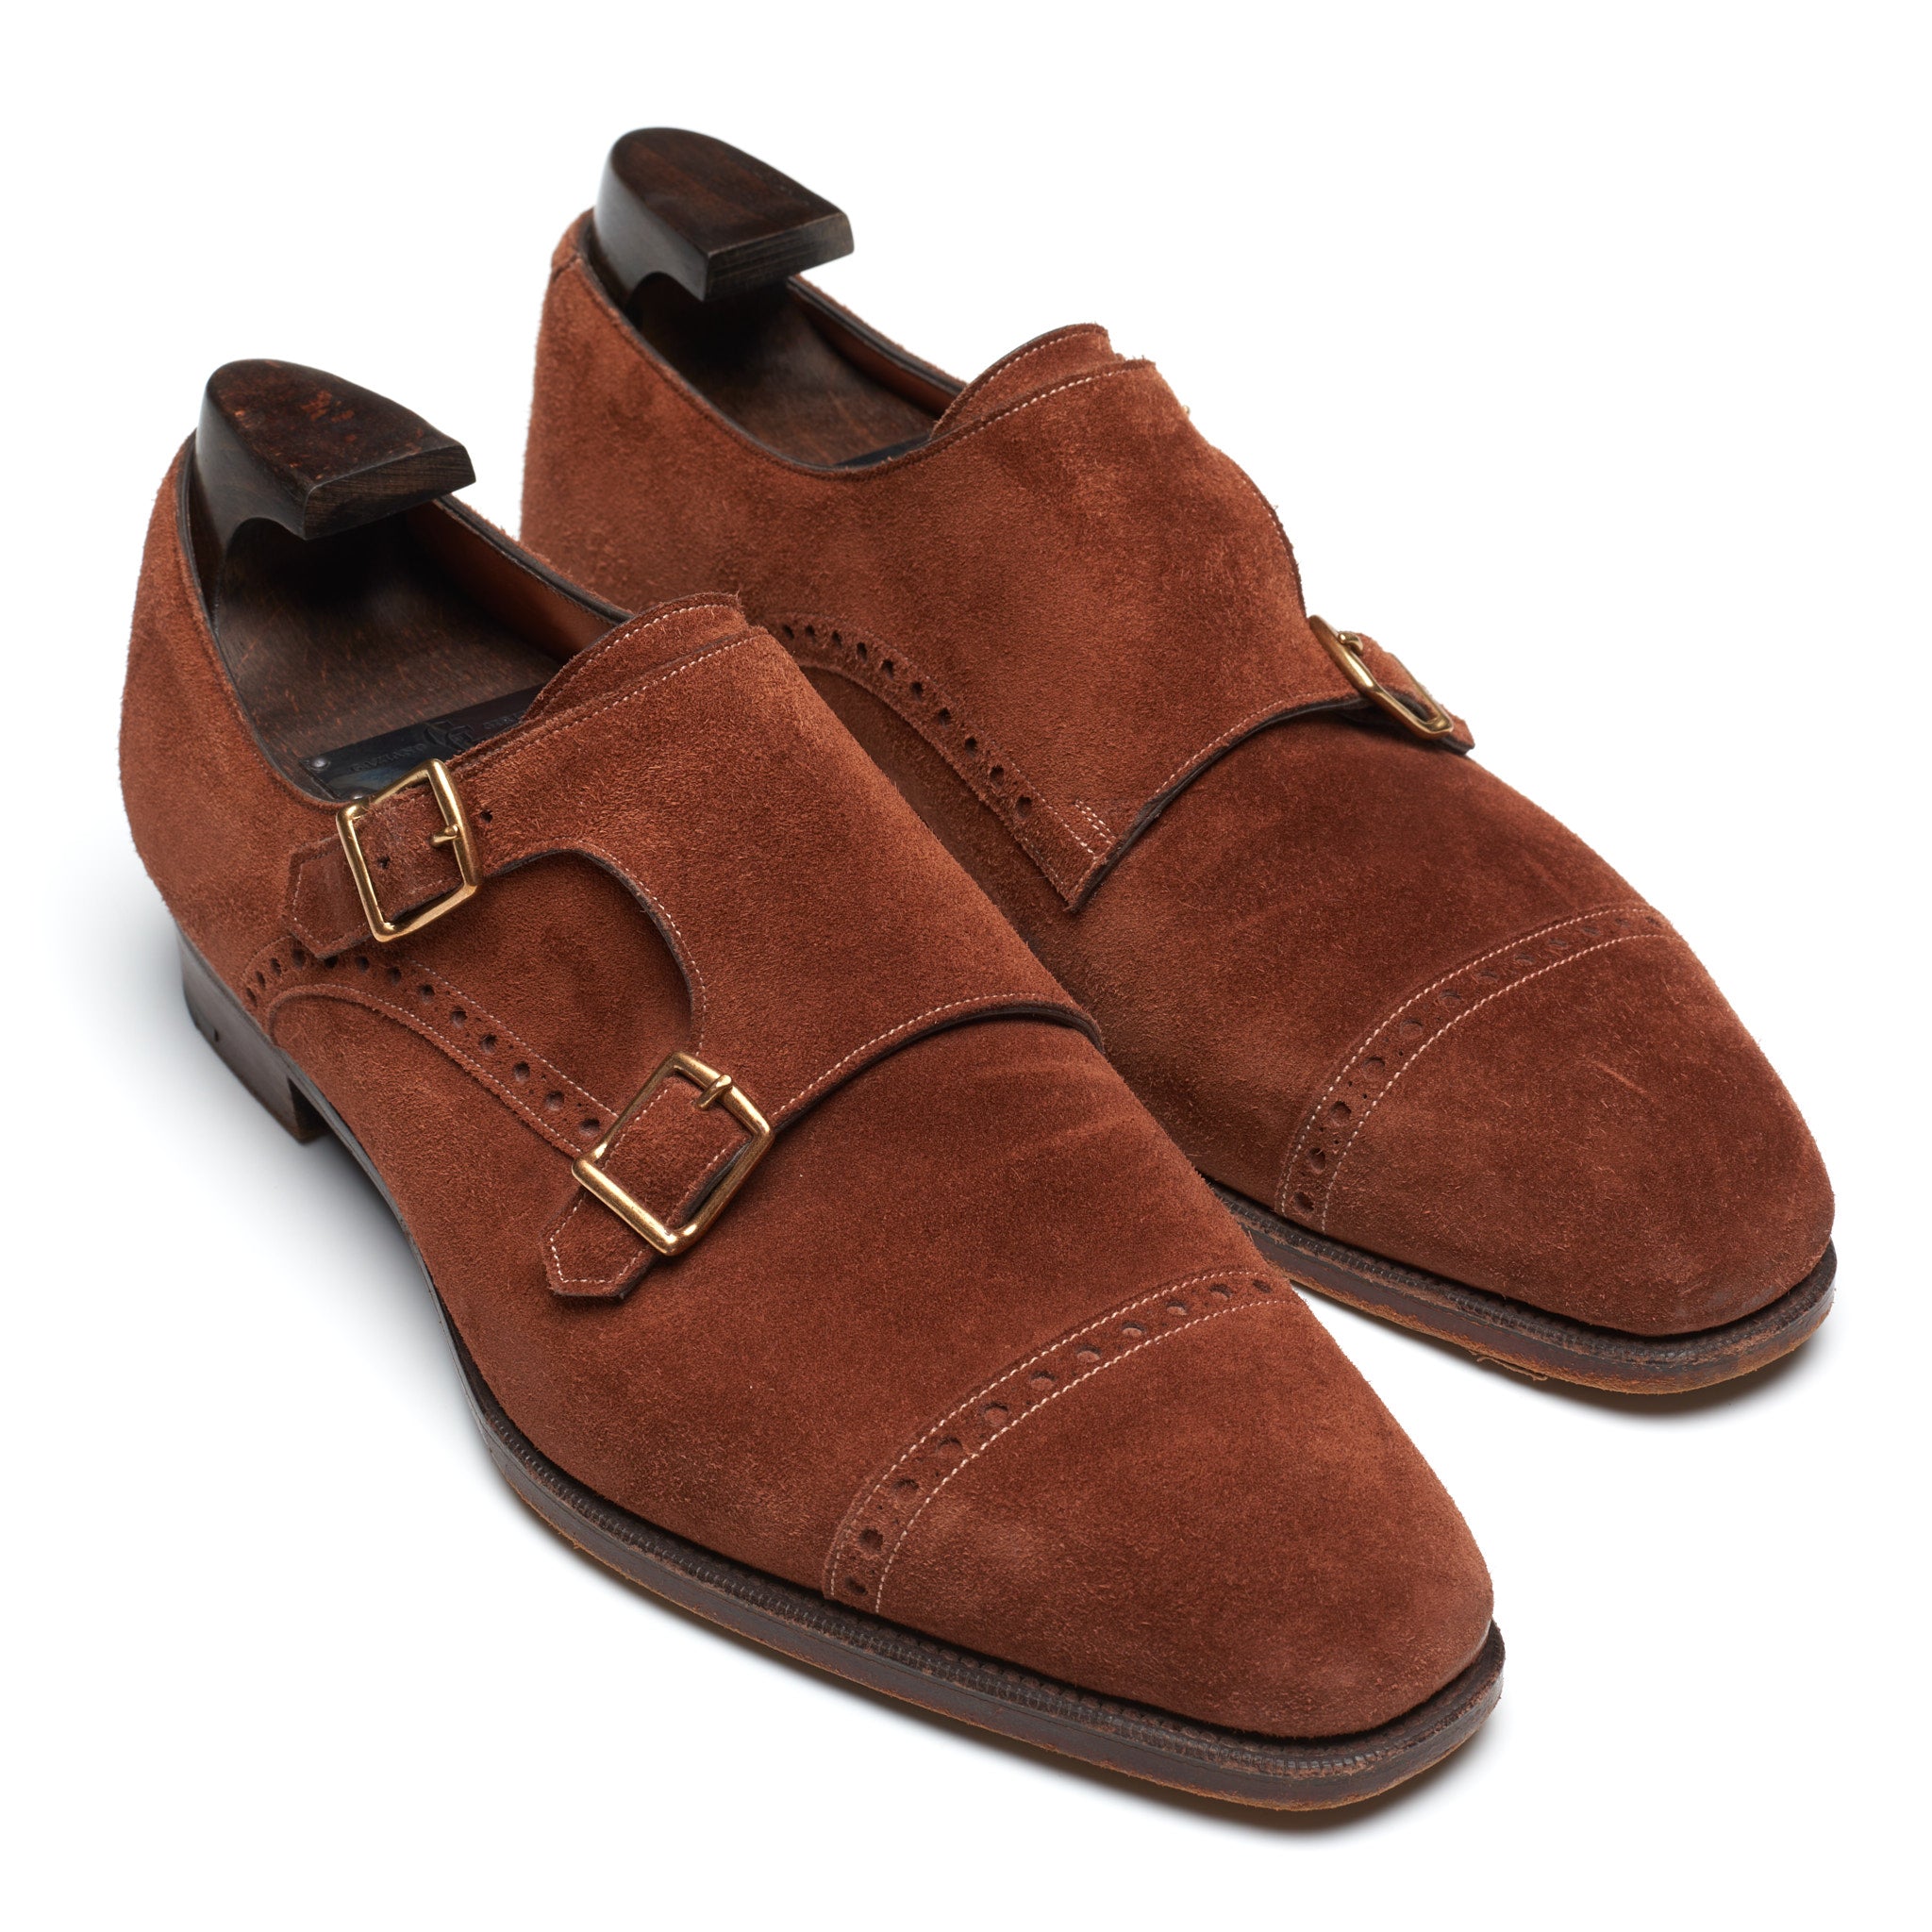 GAZIANO & GIRLING "Mayfair" Polo Suede Leather Double Monk Shoes UK 8E US 8.5 Last MH71 GAZIANO & GIRLING